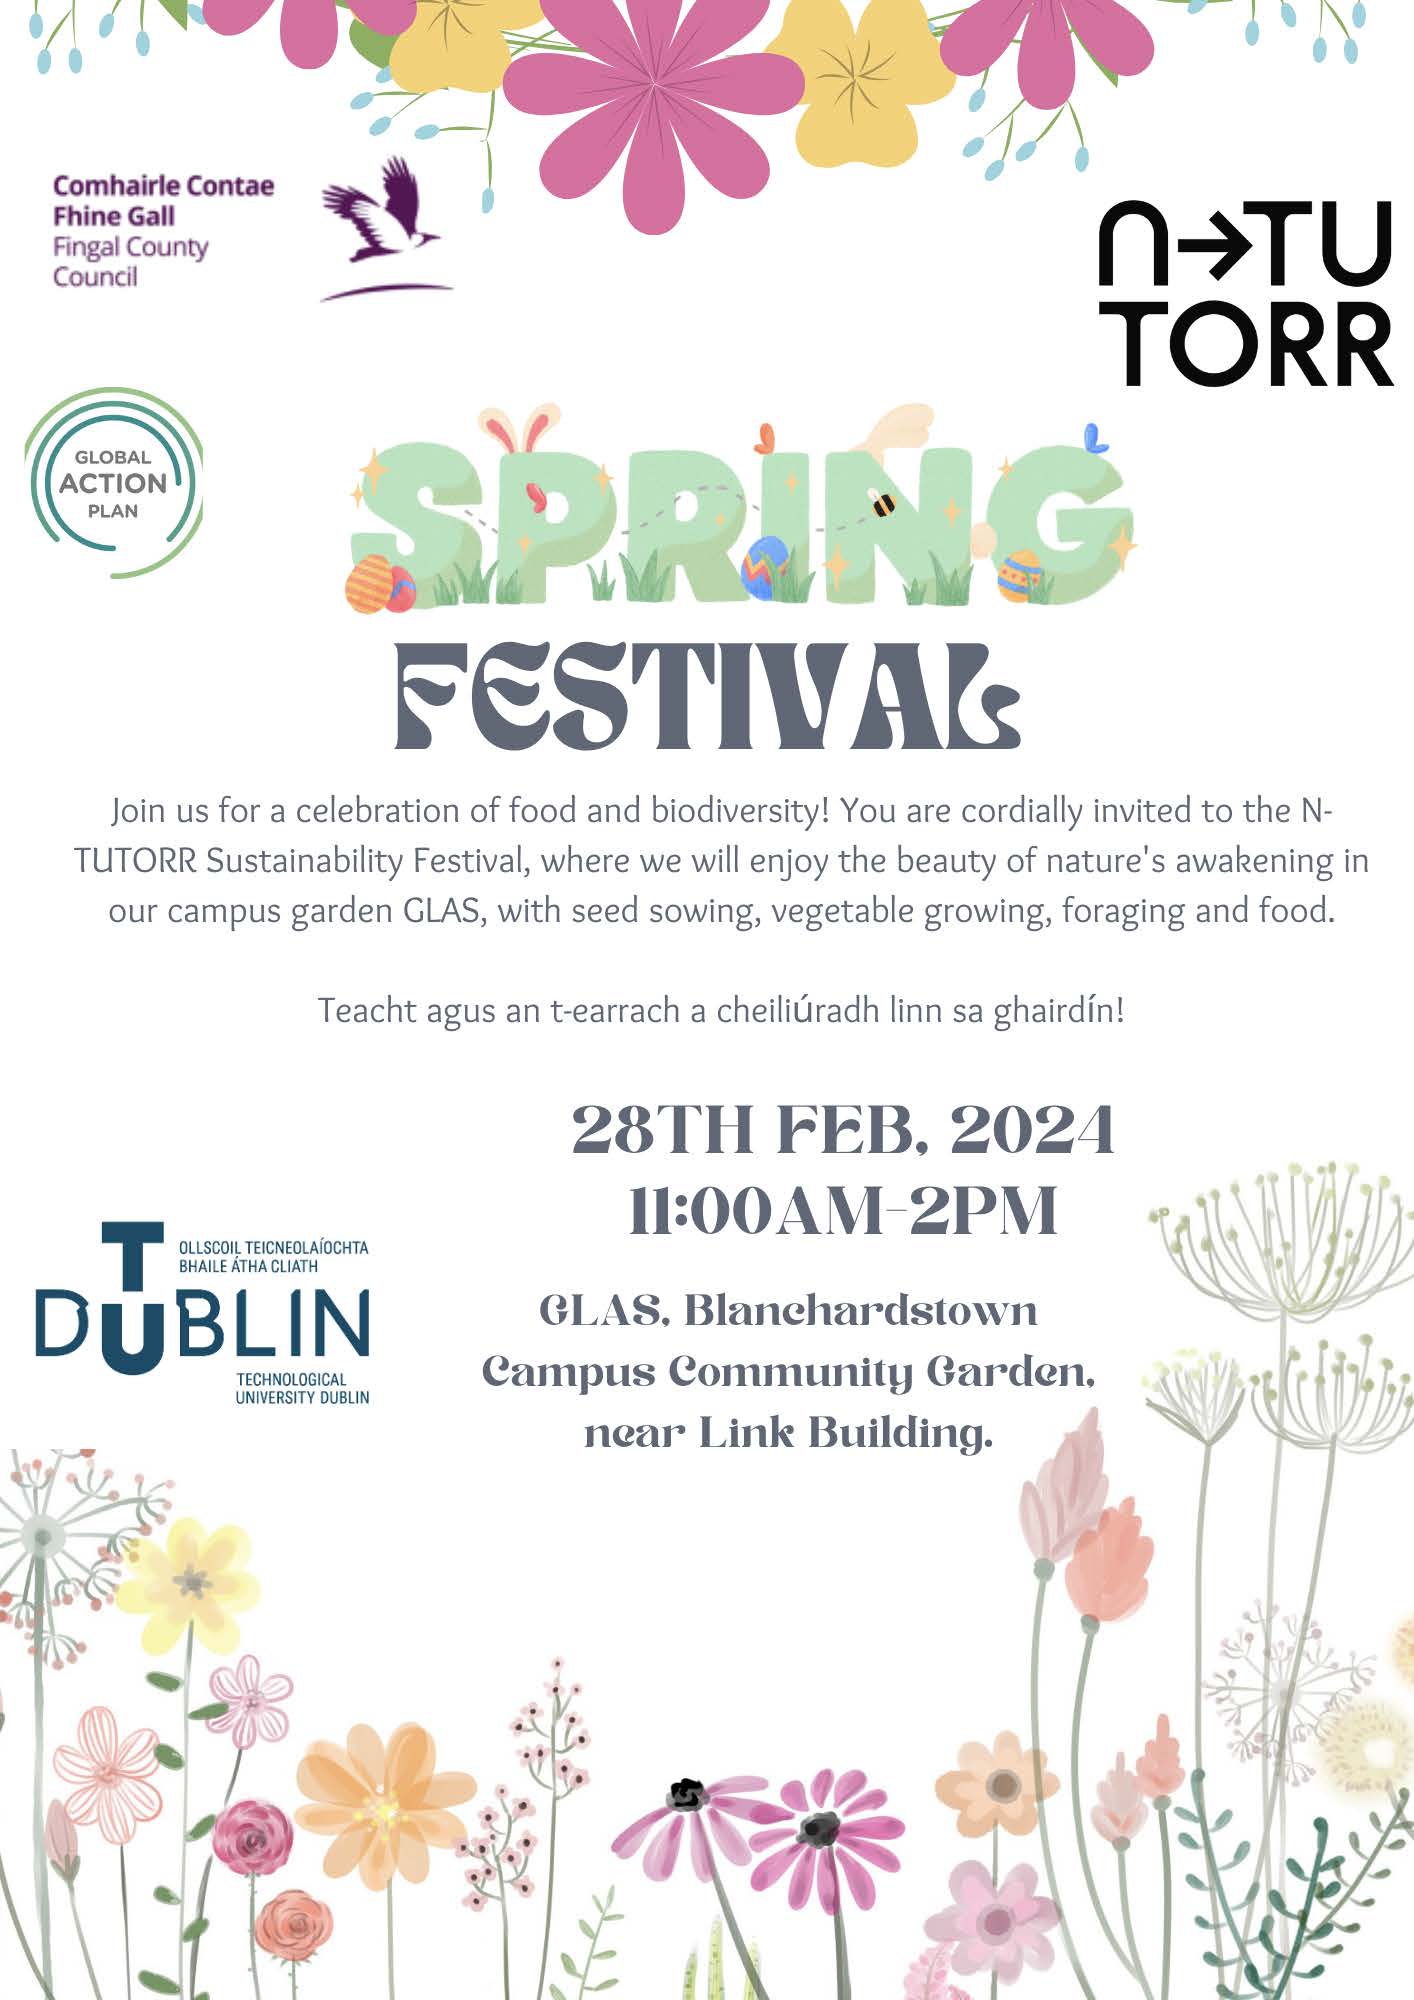 Horticulture Sustainable Spring Festival